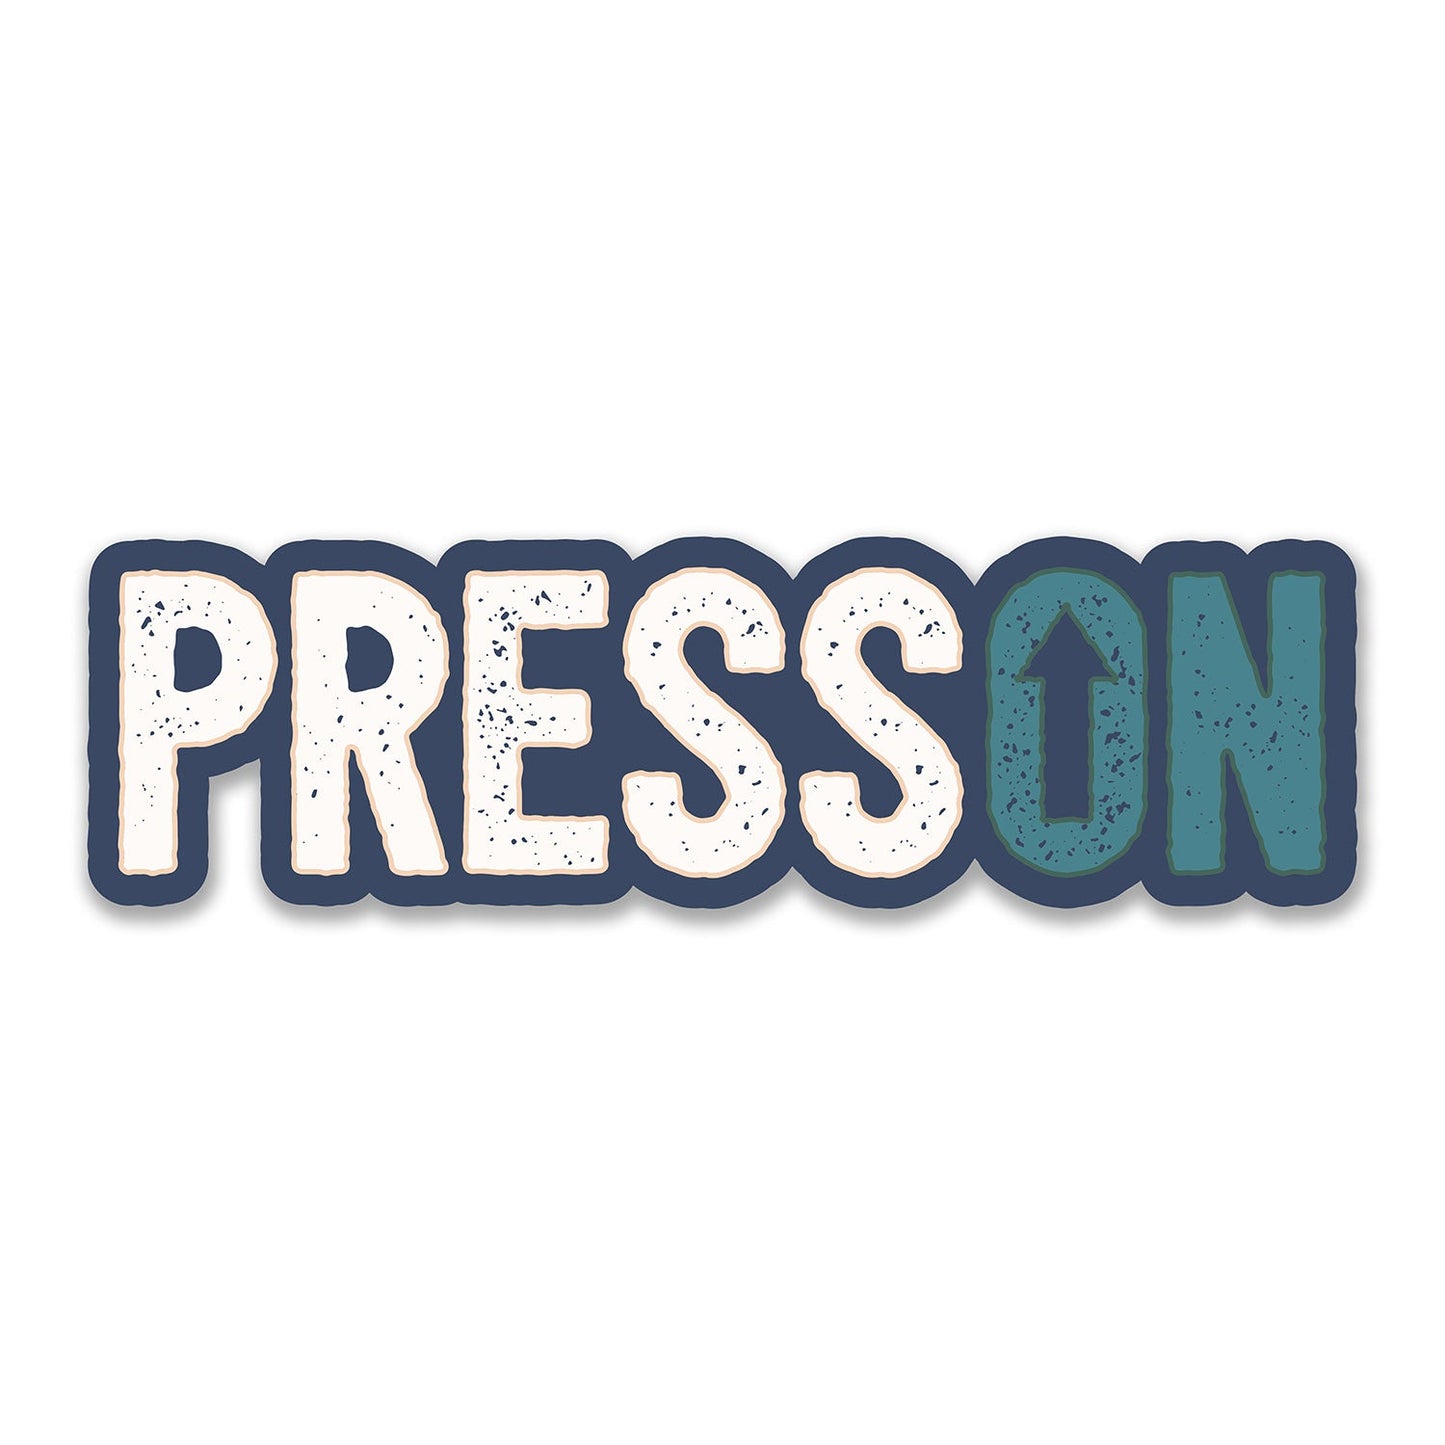 Press On - Decal